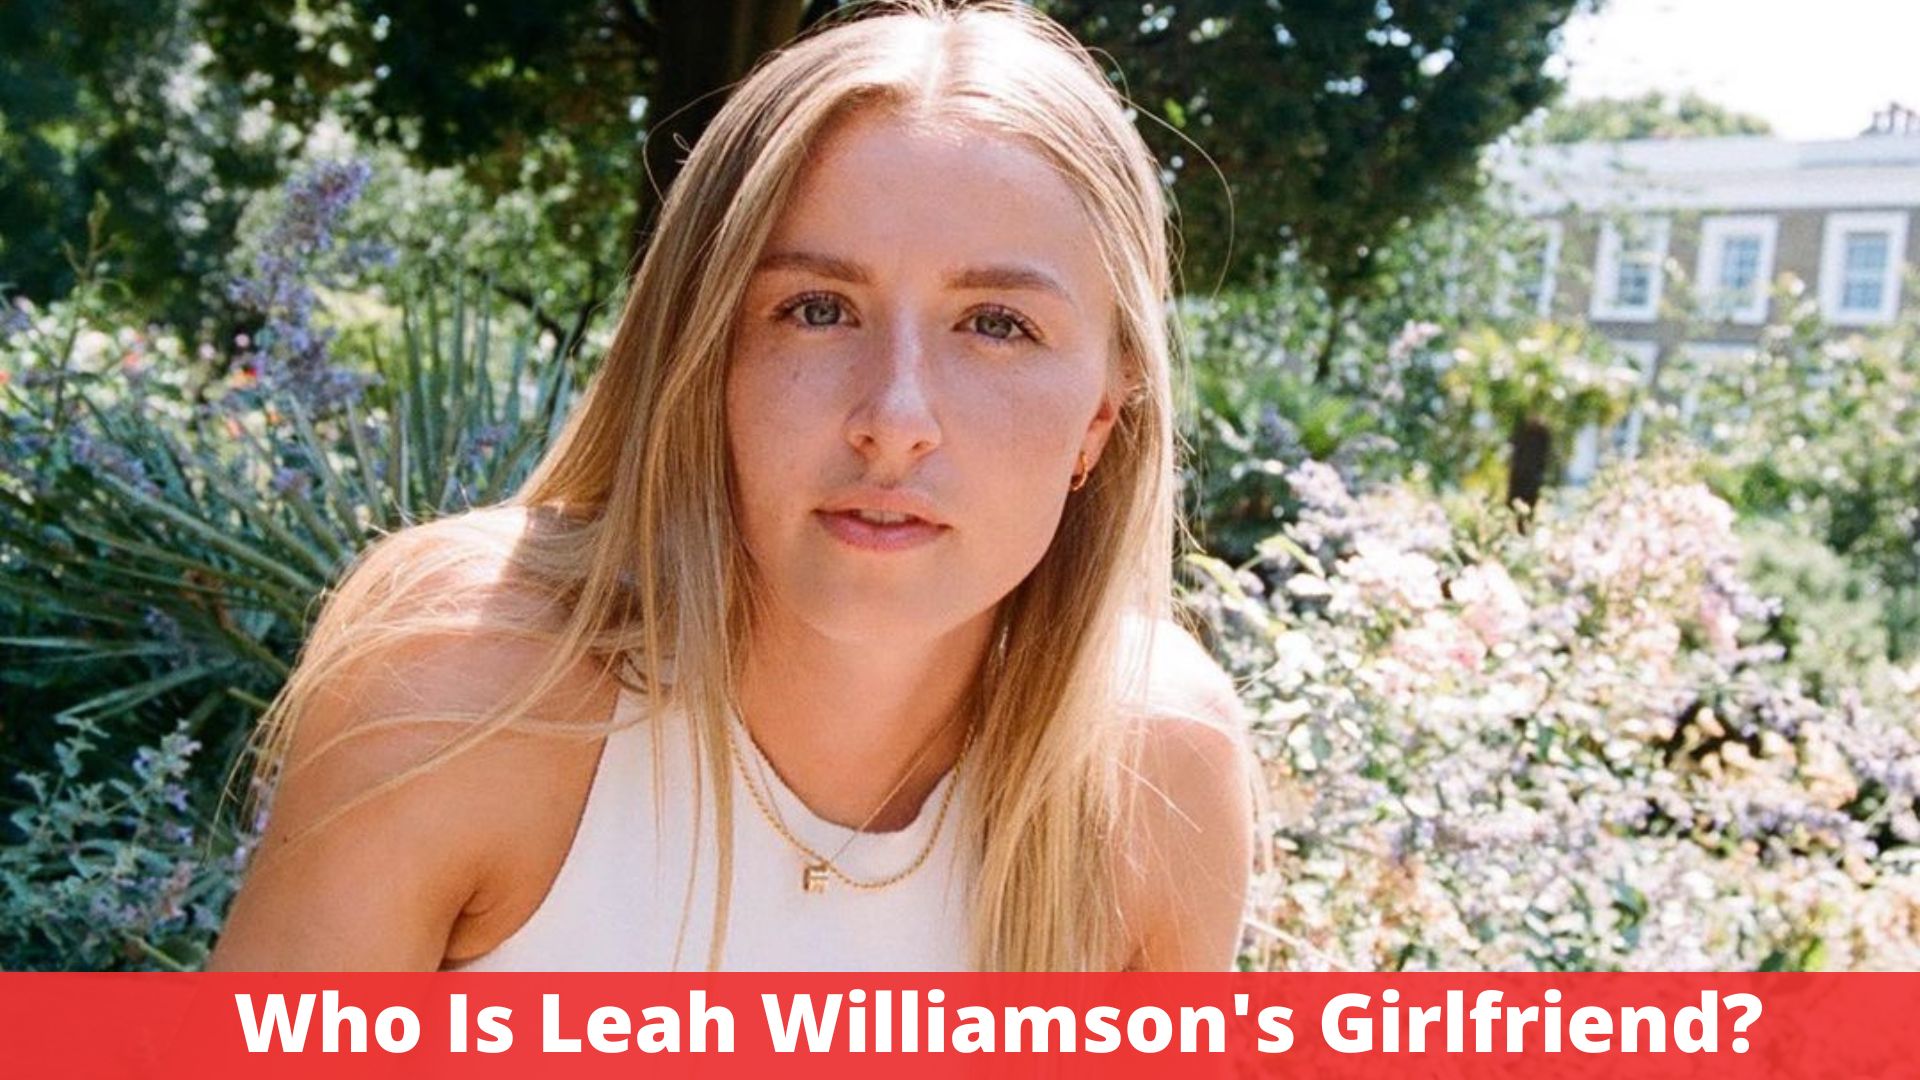 Who Is Leah Williamson's Girlfriend?